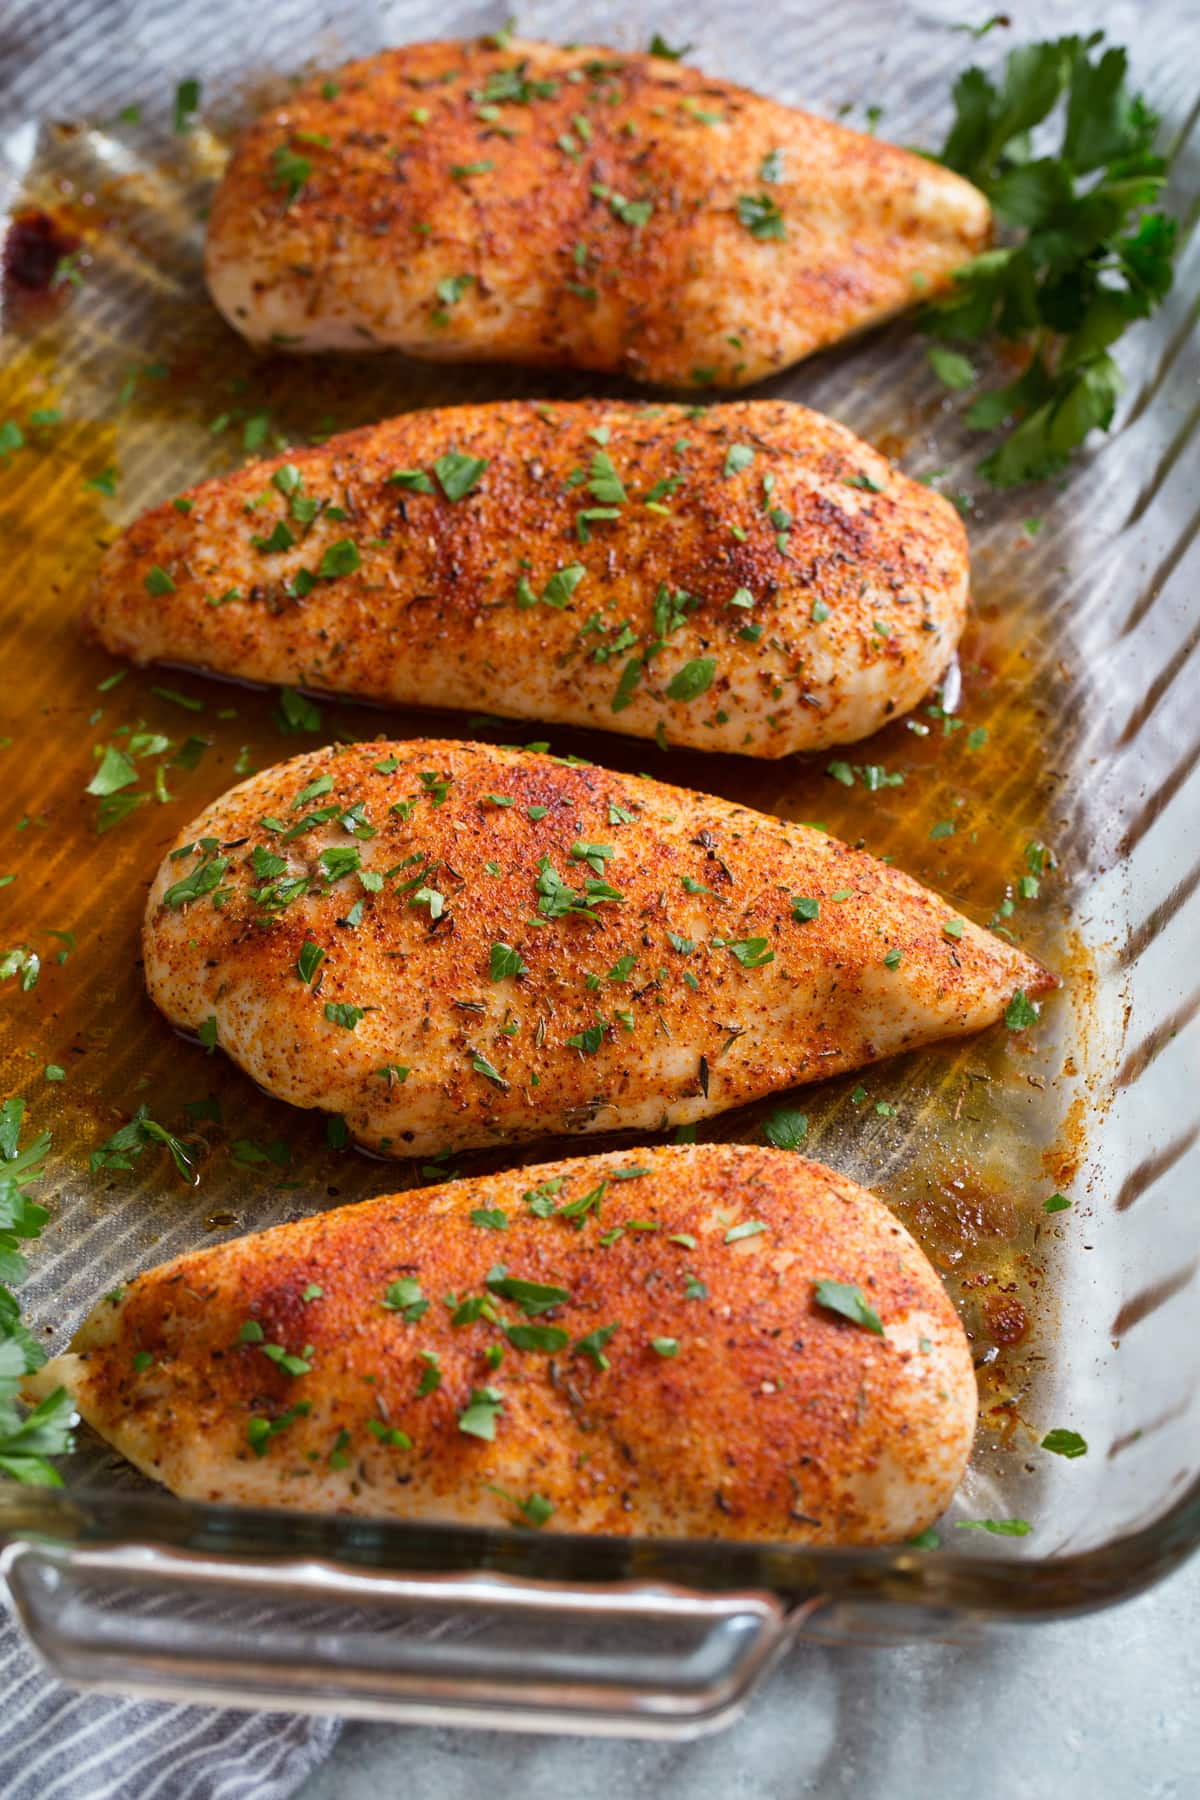 Baked Chicken Breasts Recipes Best Of Baked Chicken Breast Easy Flavorful Recipe Cooking Classy